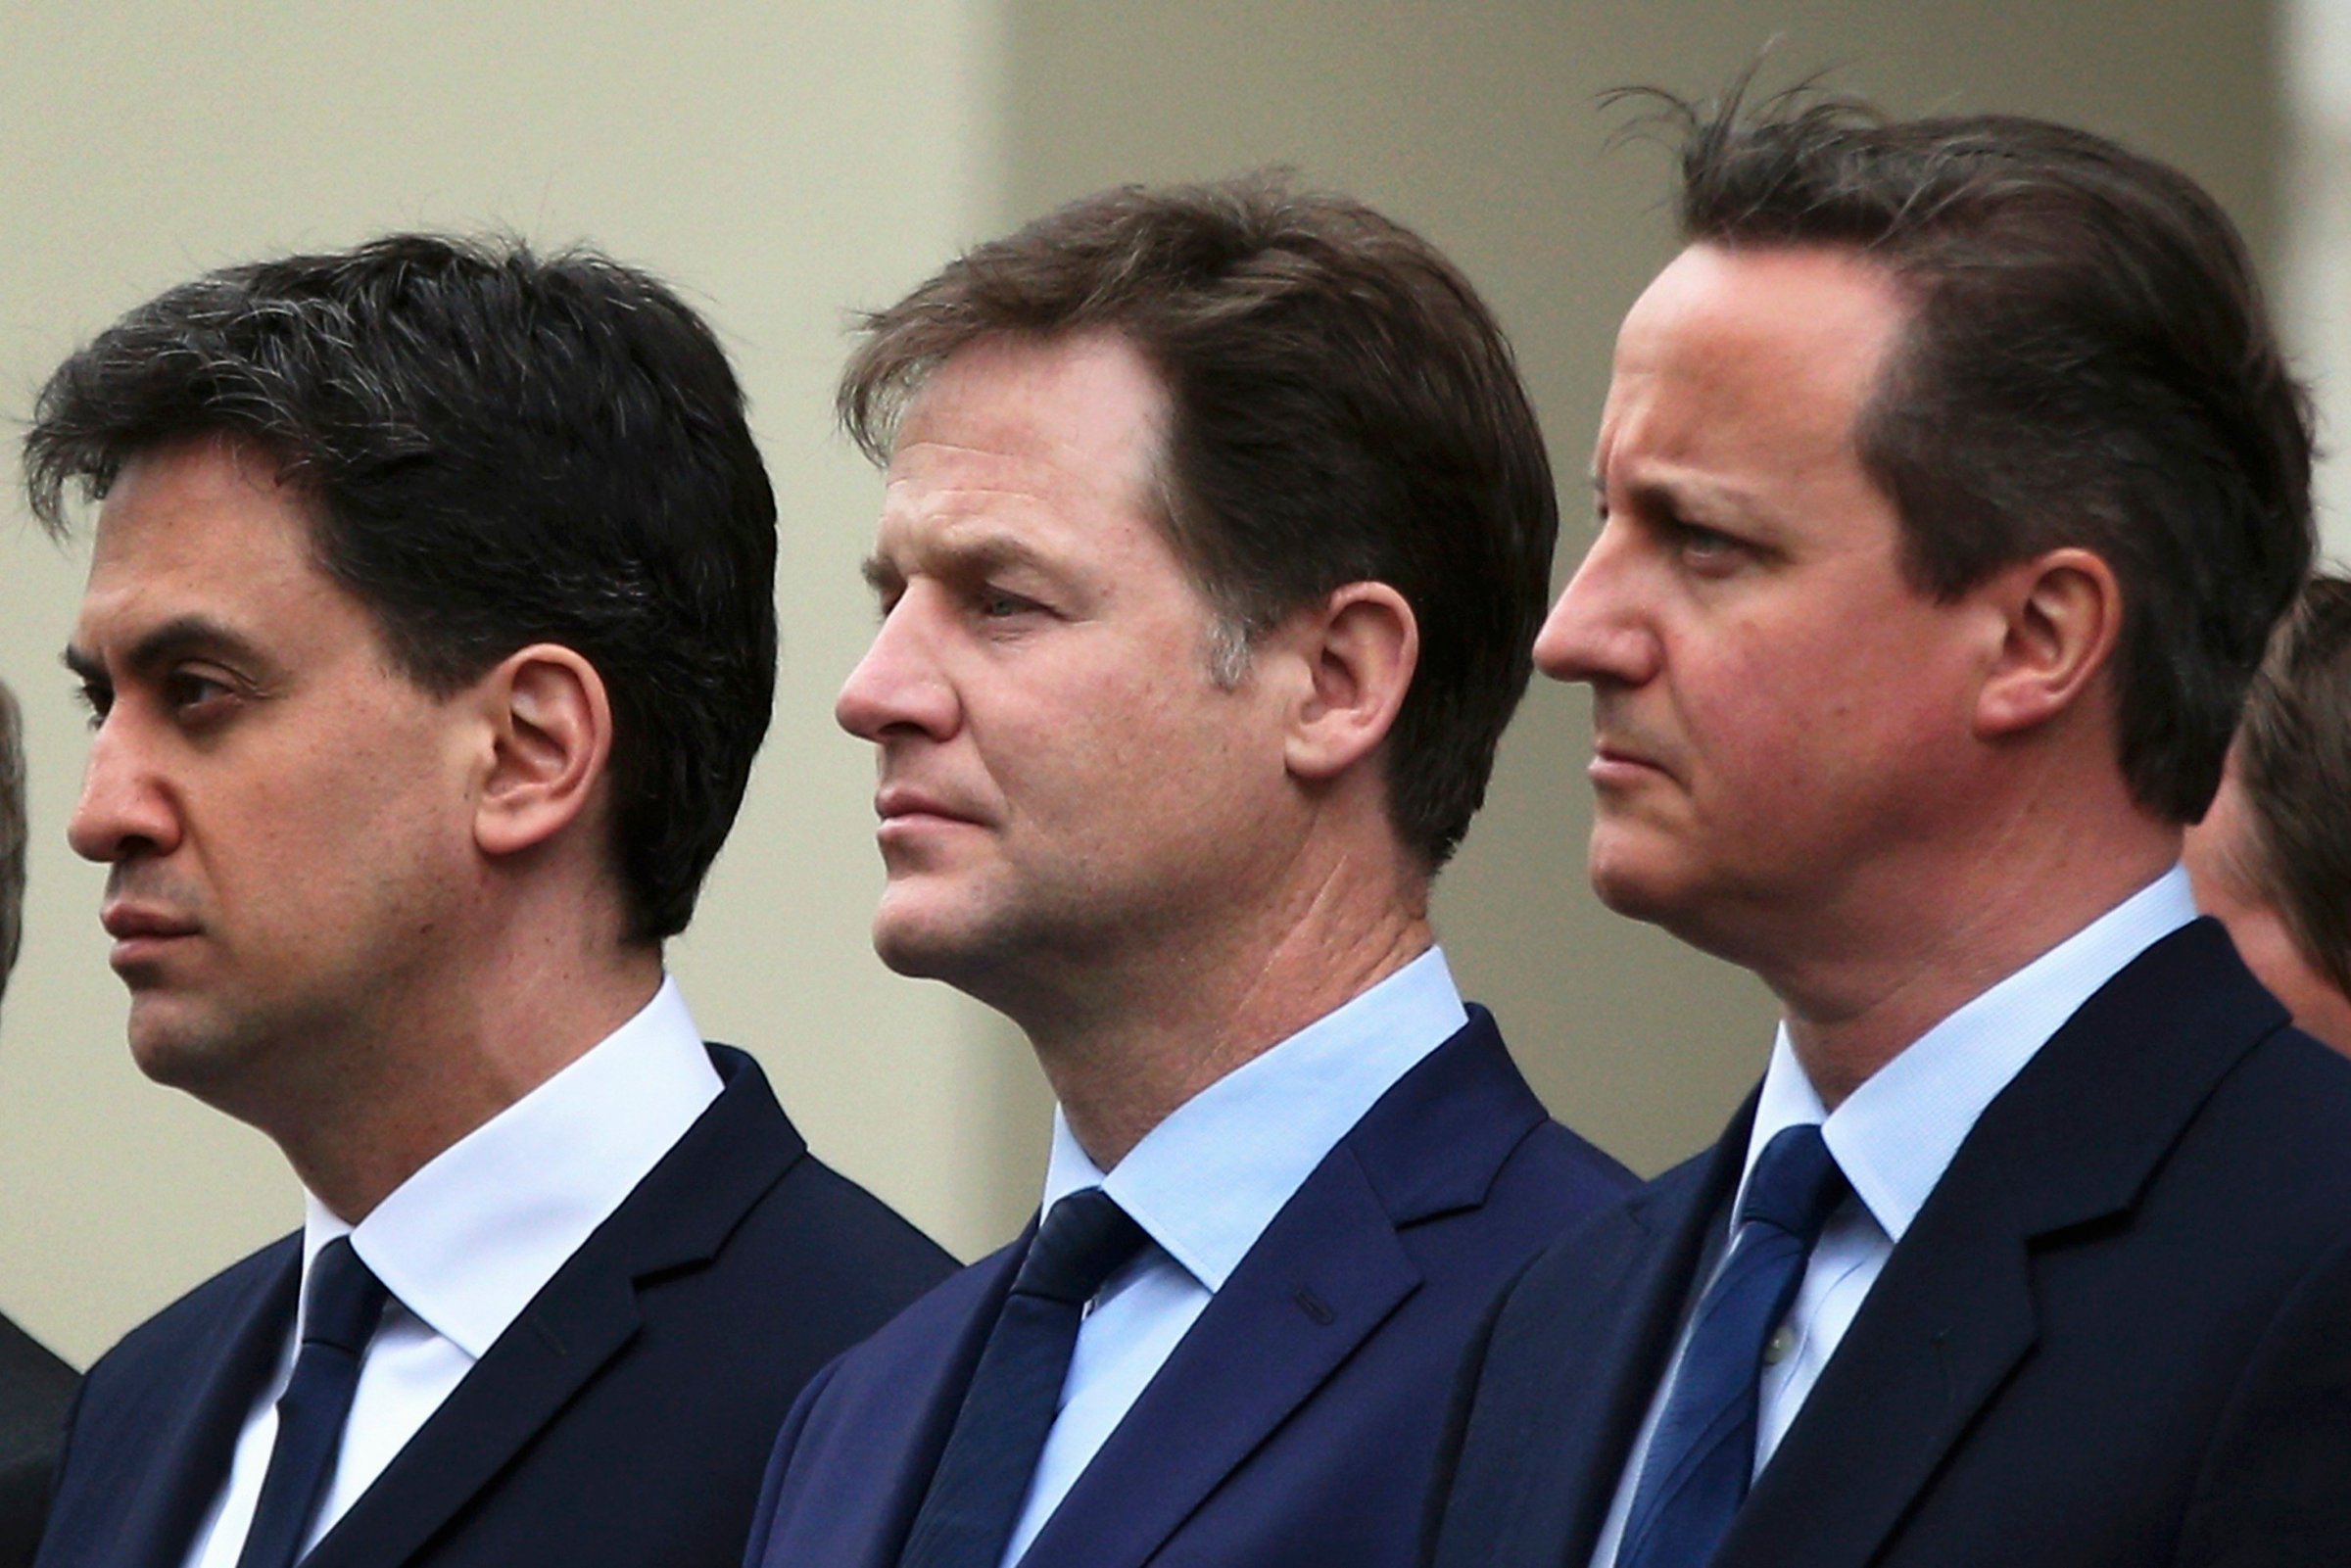 Britain's Prime Minister David Cameron (R) stands with former former Liberal Democrat leader Nick Clegg (C) and former Labour Party leader Ed Miliband, as they line up to pay tribute at the Cenotaph during a Victory in Europe (VE) day ceremony in central London on May 8, 2015.